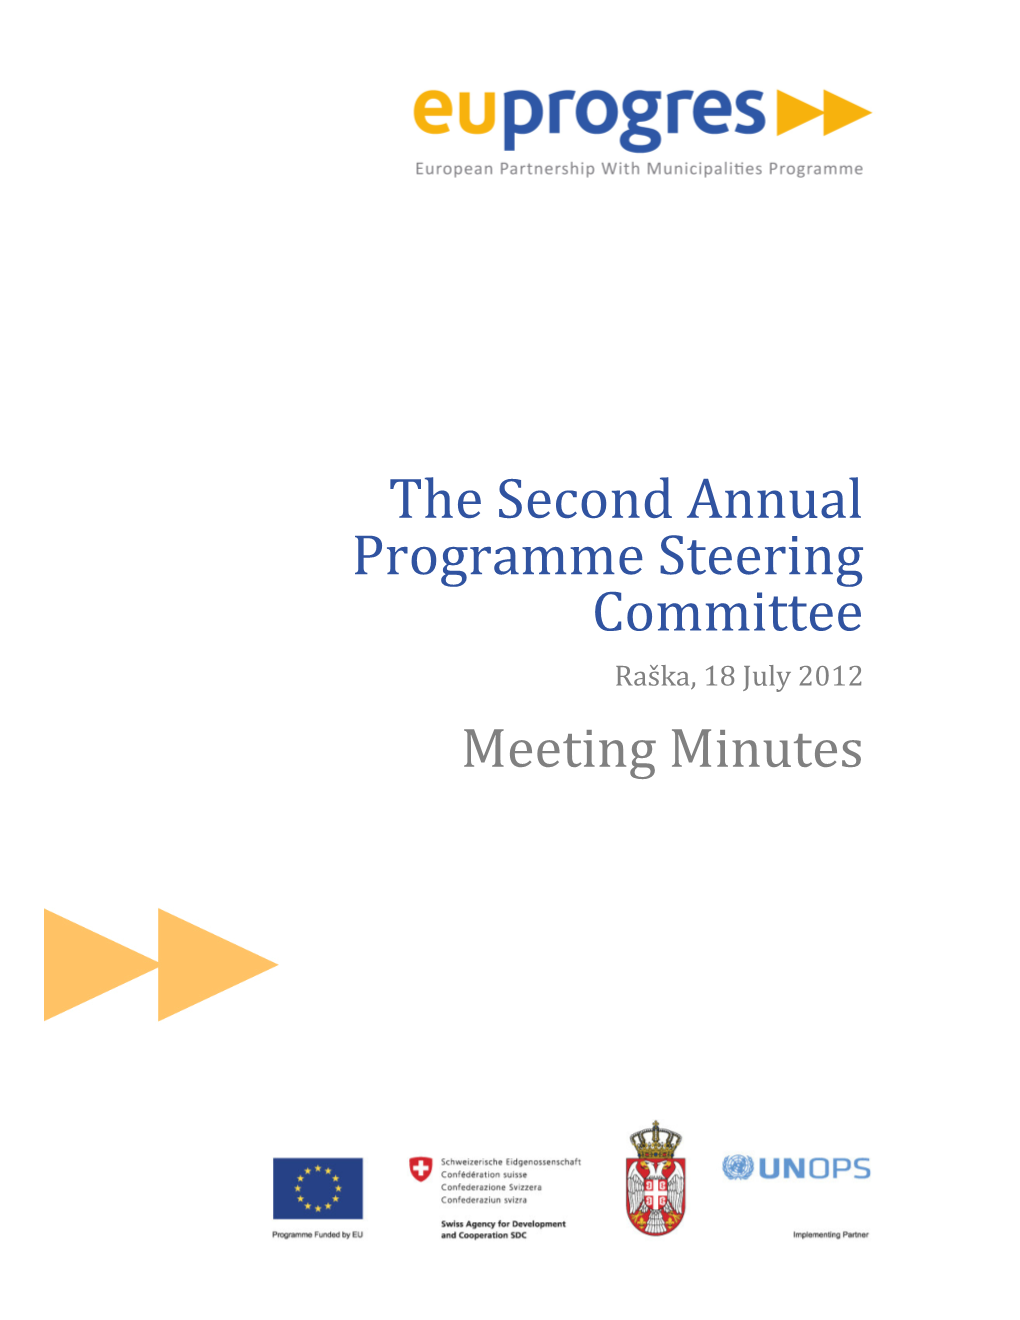 The Second Annual Programme Steering Committee Raška, 18 July 2012 Meeting Minutes